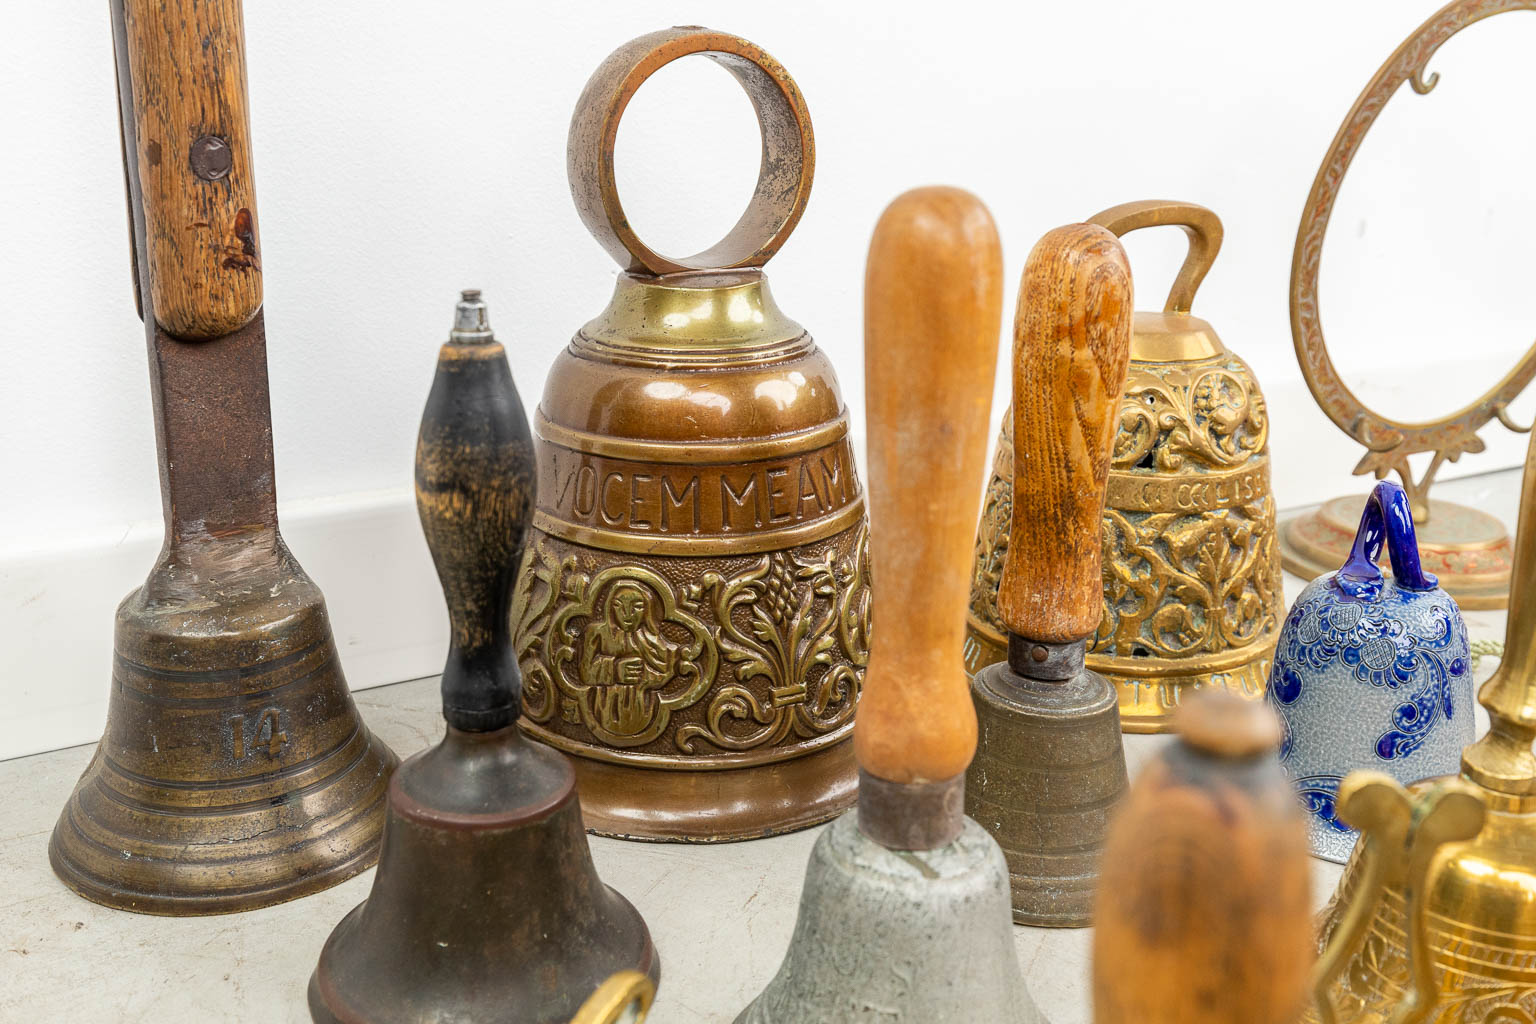 A large collection of table bells made of bronze and metal. 